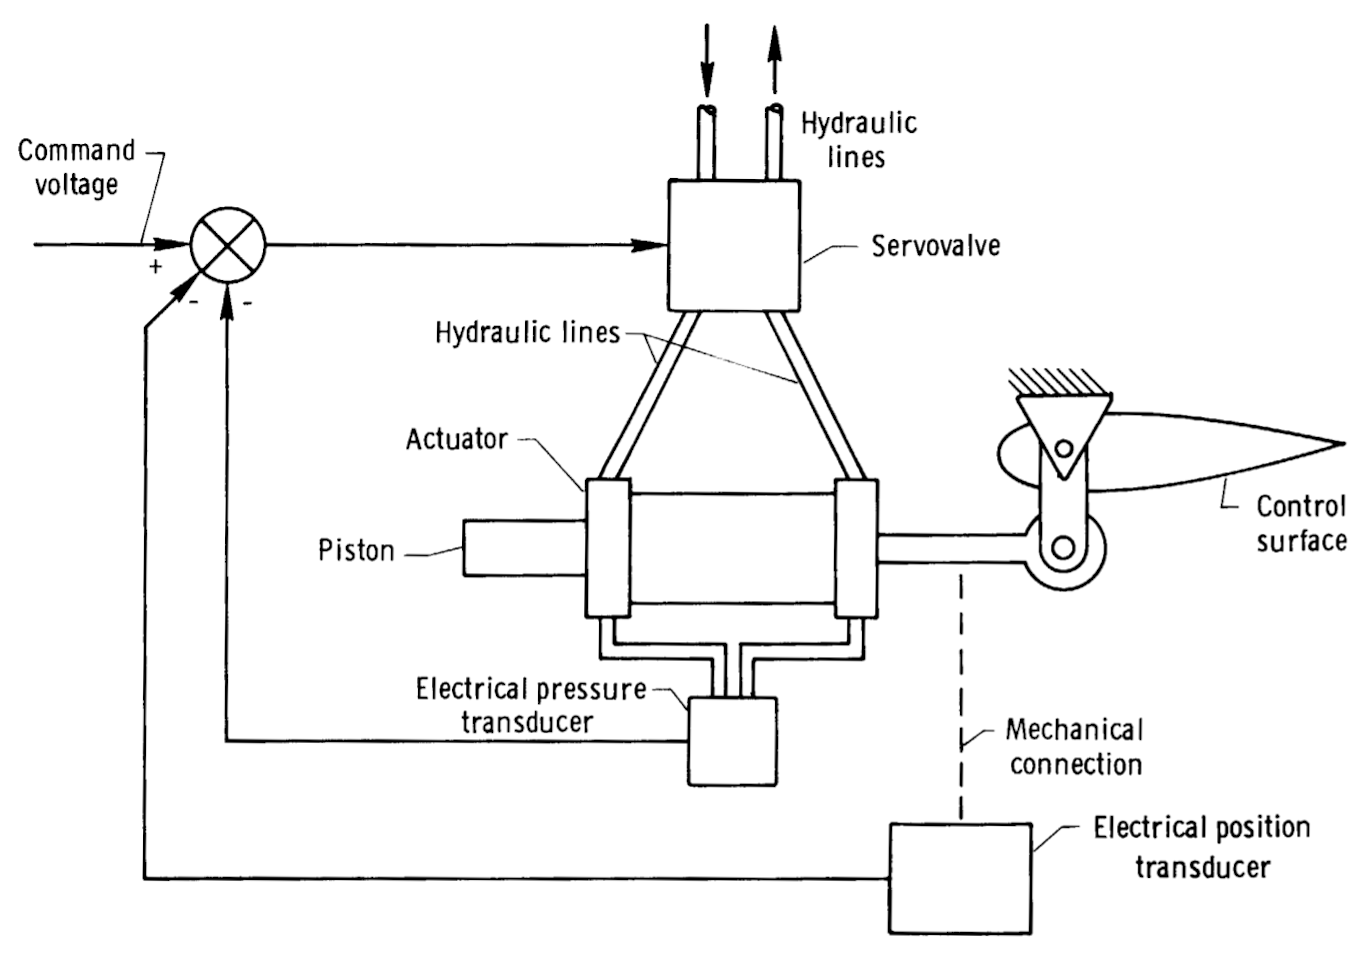 Aircraft control-surface control system powered by an electrohydraulic servovalve. Source: NASA. Edwards, J. W. (1972). Analysis of an electrohydraulic aircraft control surface servo and comparison with test results. (Click image to enlarge)